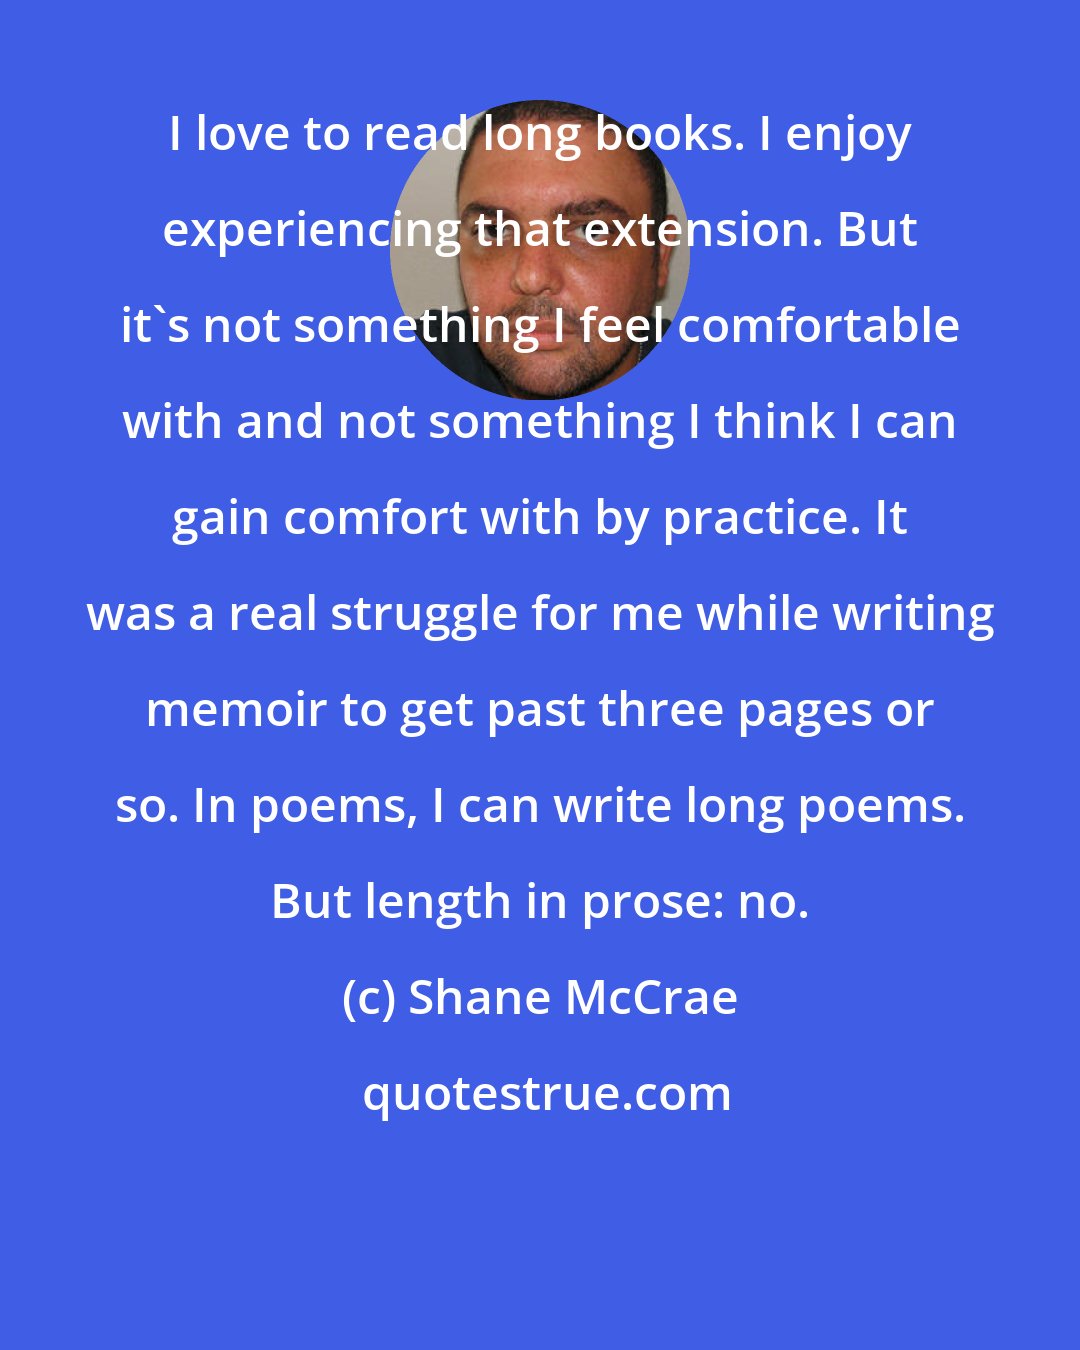 Shane McCrae: I love to read long books. I enjoy experiencing that extension. But it's not something I feel comfortable with and not something I think I can gain comfort with by practice. It was a real struggle for me while writing memoir to get past three pages or so. In poems, I can write long poems. But length in prose: no.